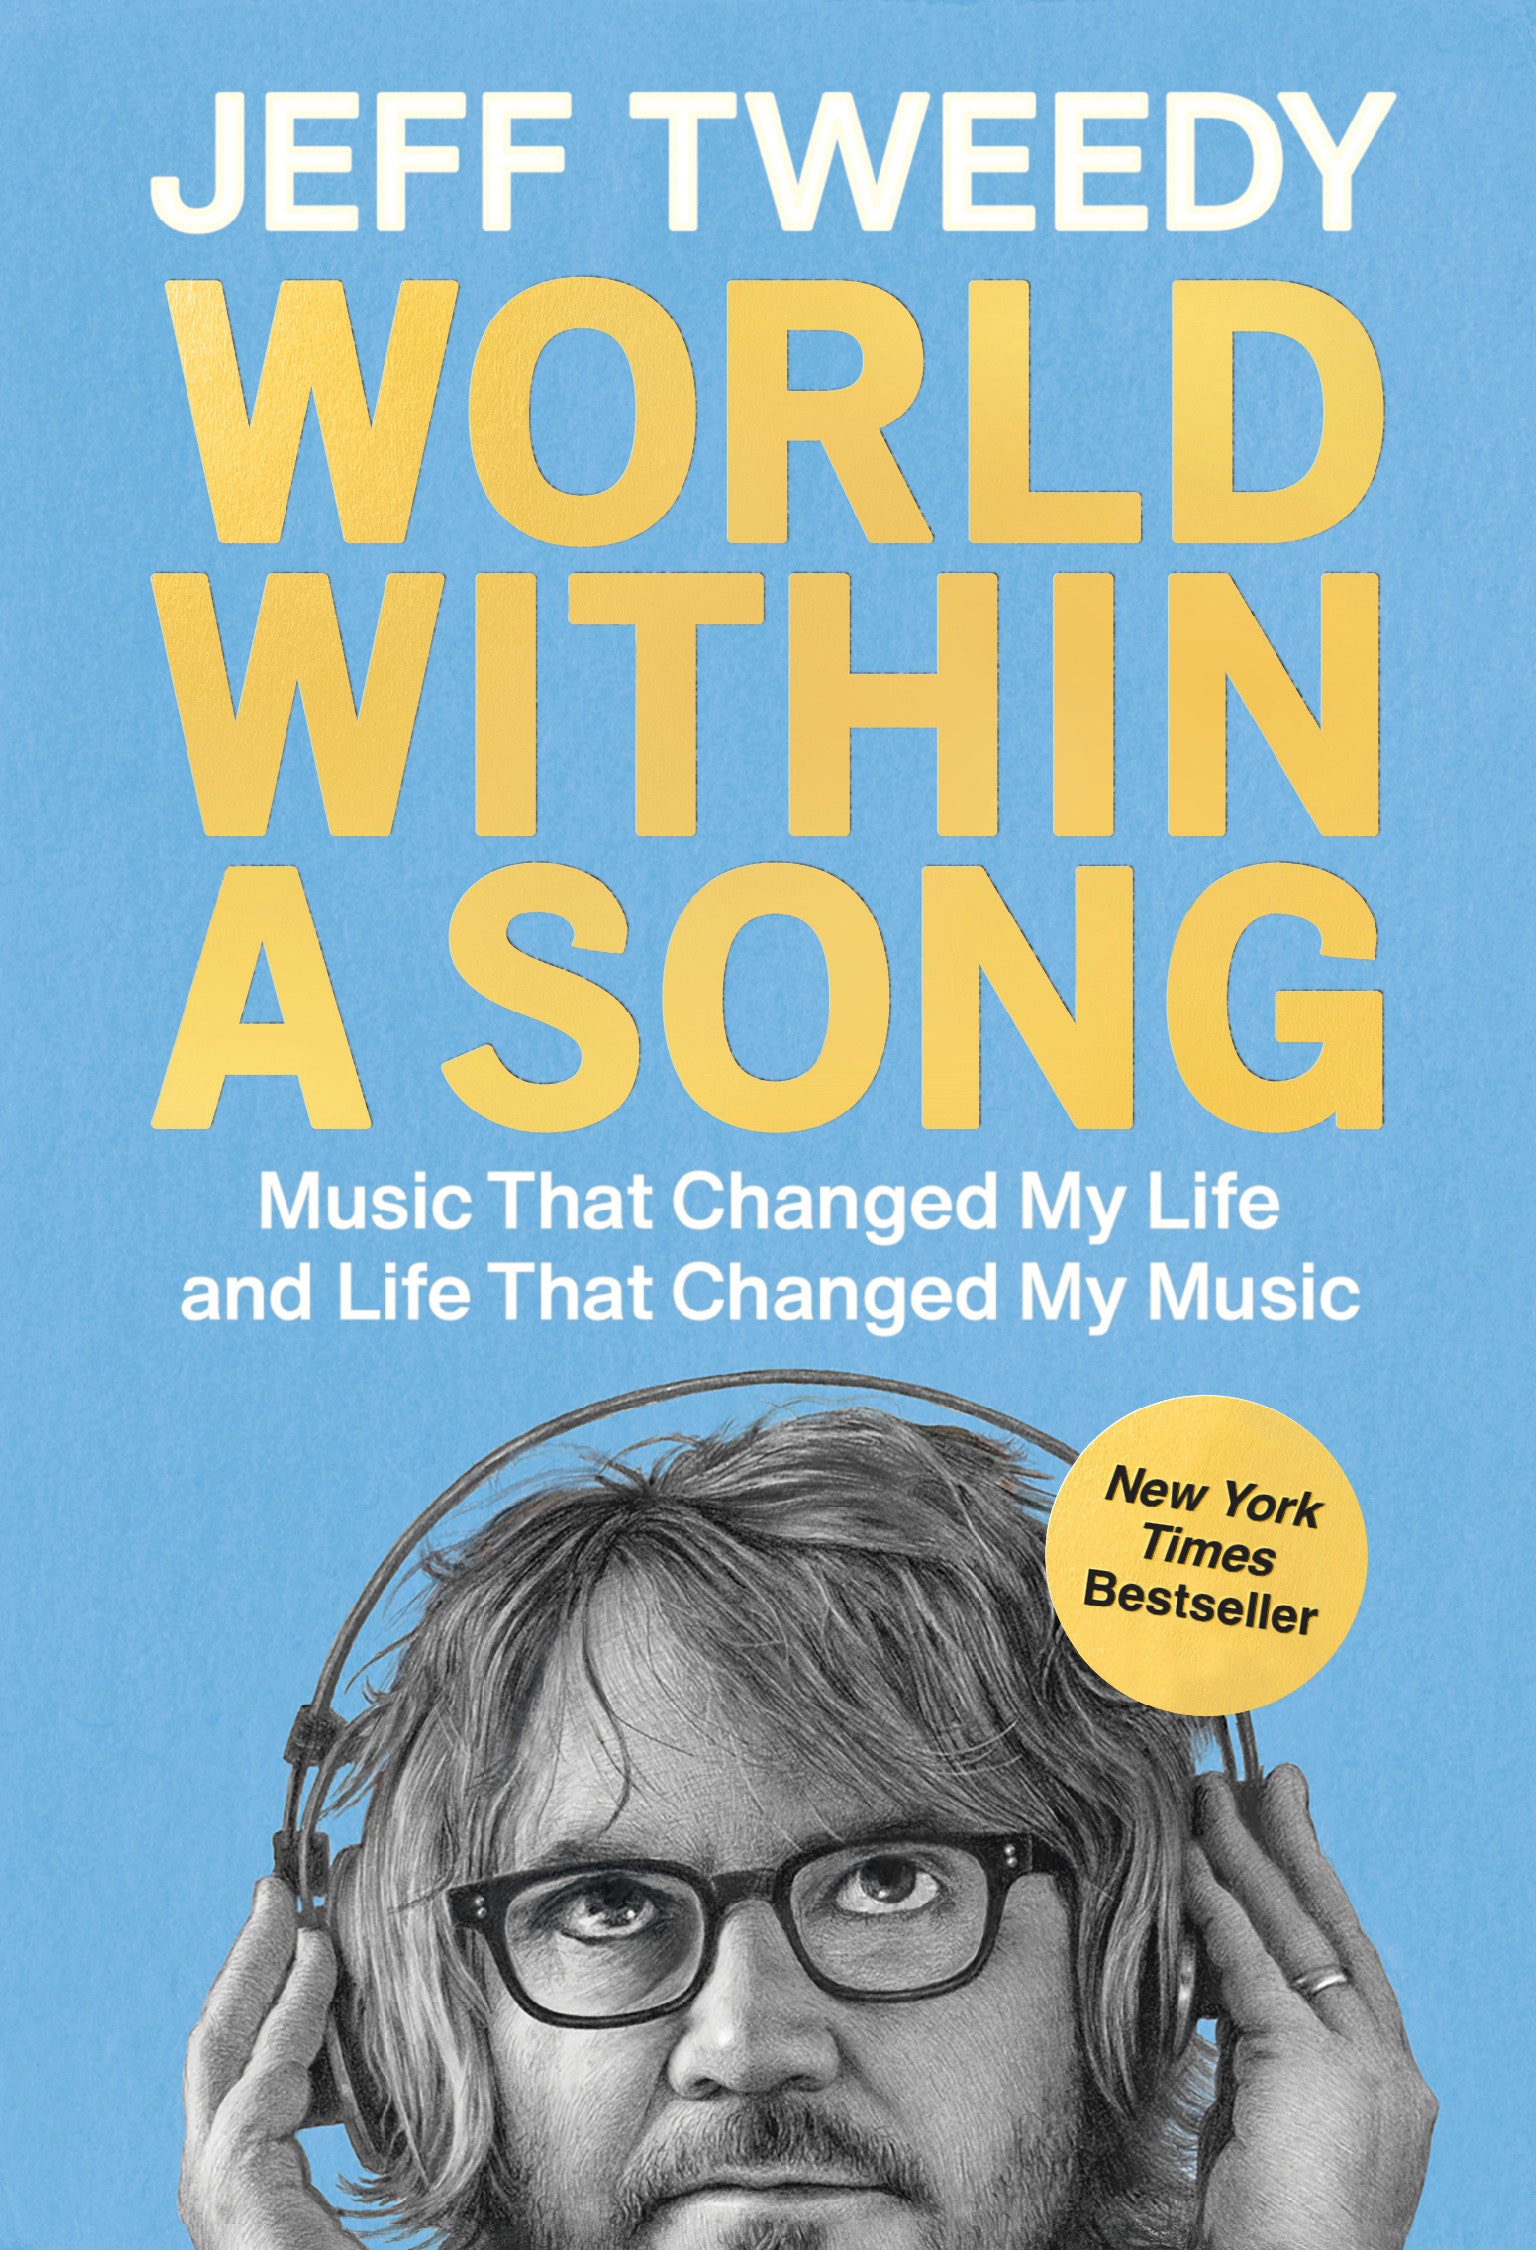 Jeff Tweedy on Rock Criticism the Pitfalls of Music Snobbery and His New Book